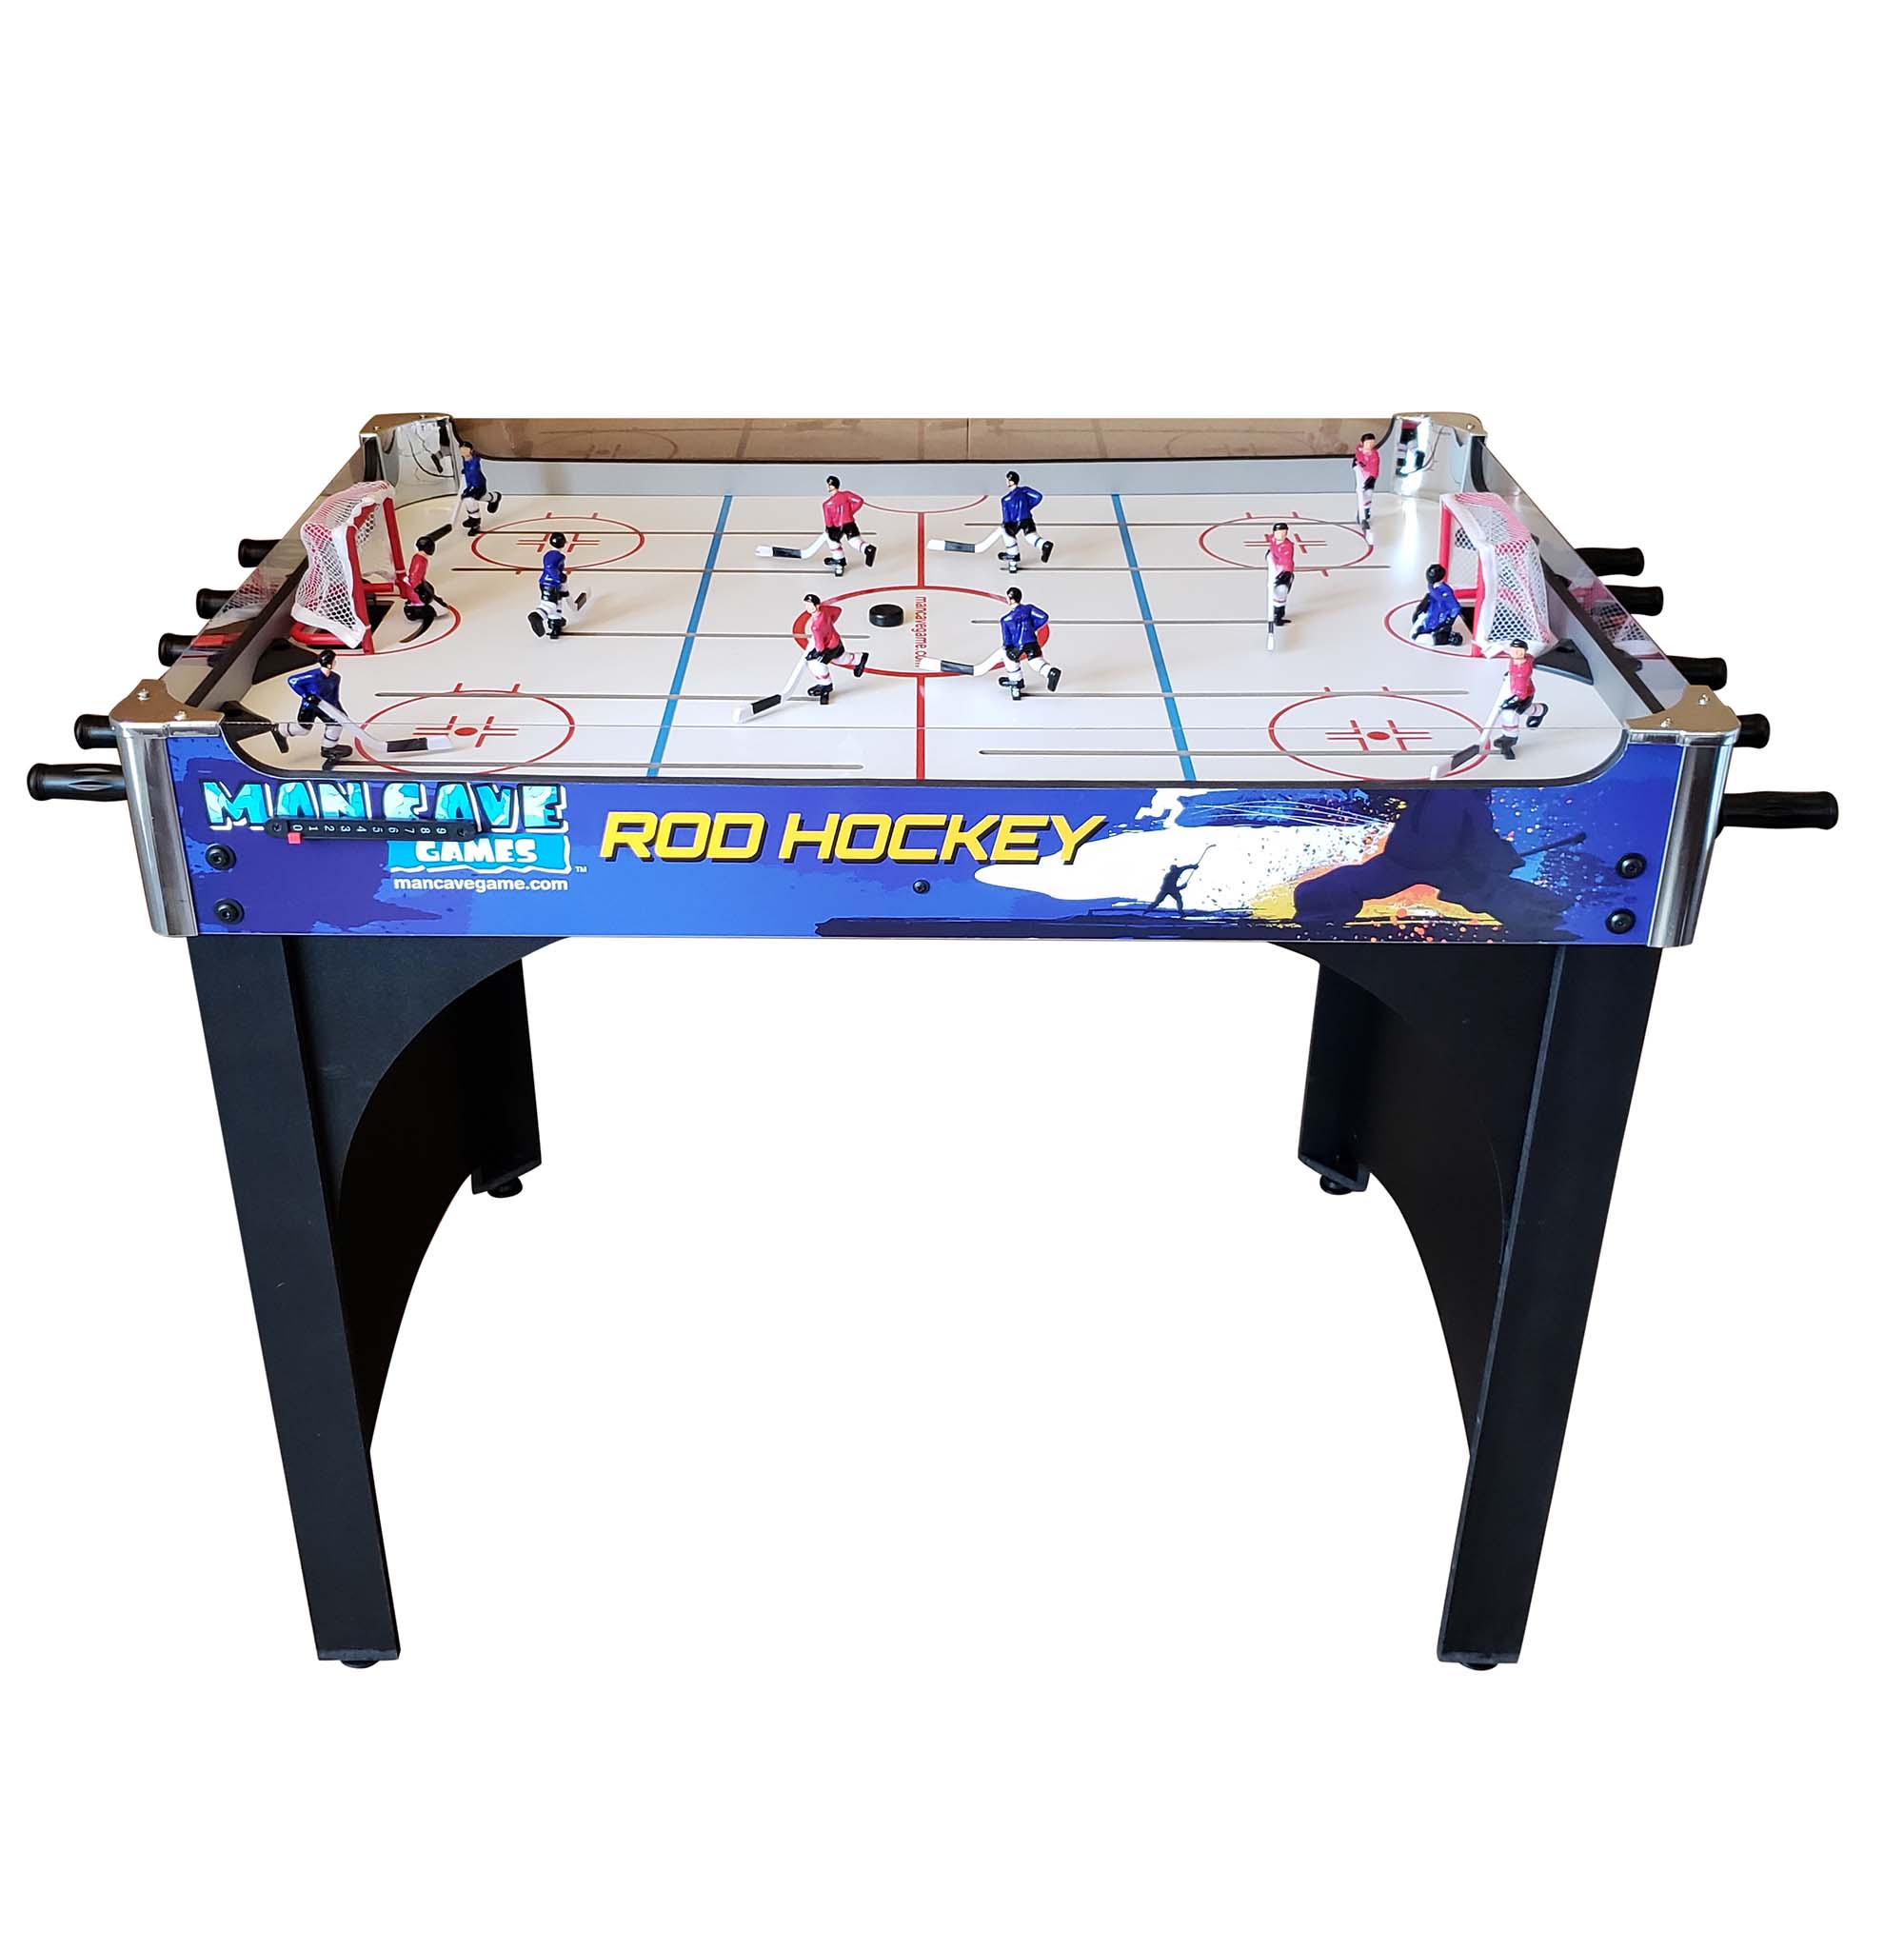 Mancave Games 40 Rod Hockey Game Table